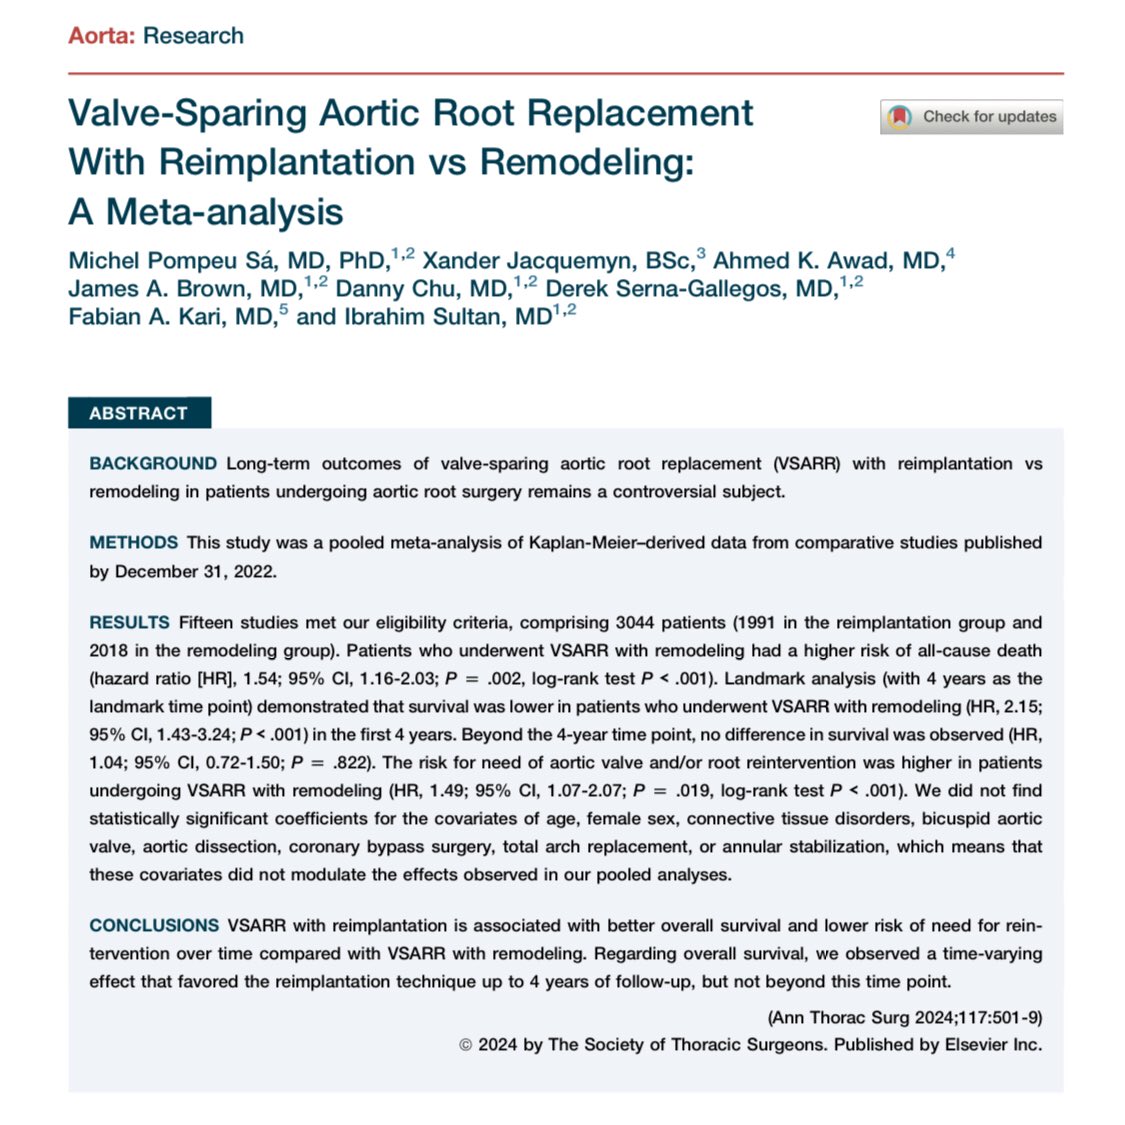 🔥Hot off the press🔥 Read our paper just published in @annalsthorsurg about #VSARR with reimplantation vs remodeling techniques annalsthoracicsurgery.org/article/S0003-… 💪 @XanderJacquemyn @drahmedawadd #Brown #Chu #SernaGallegos @IbrahimSultanMD @UPMC_CTSurgery @HviUpmc #AortaEd @tssmn